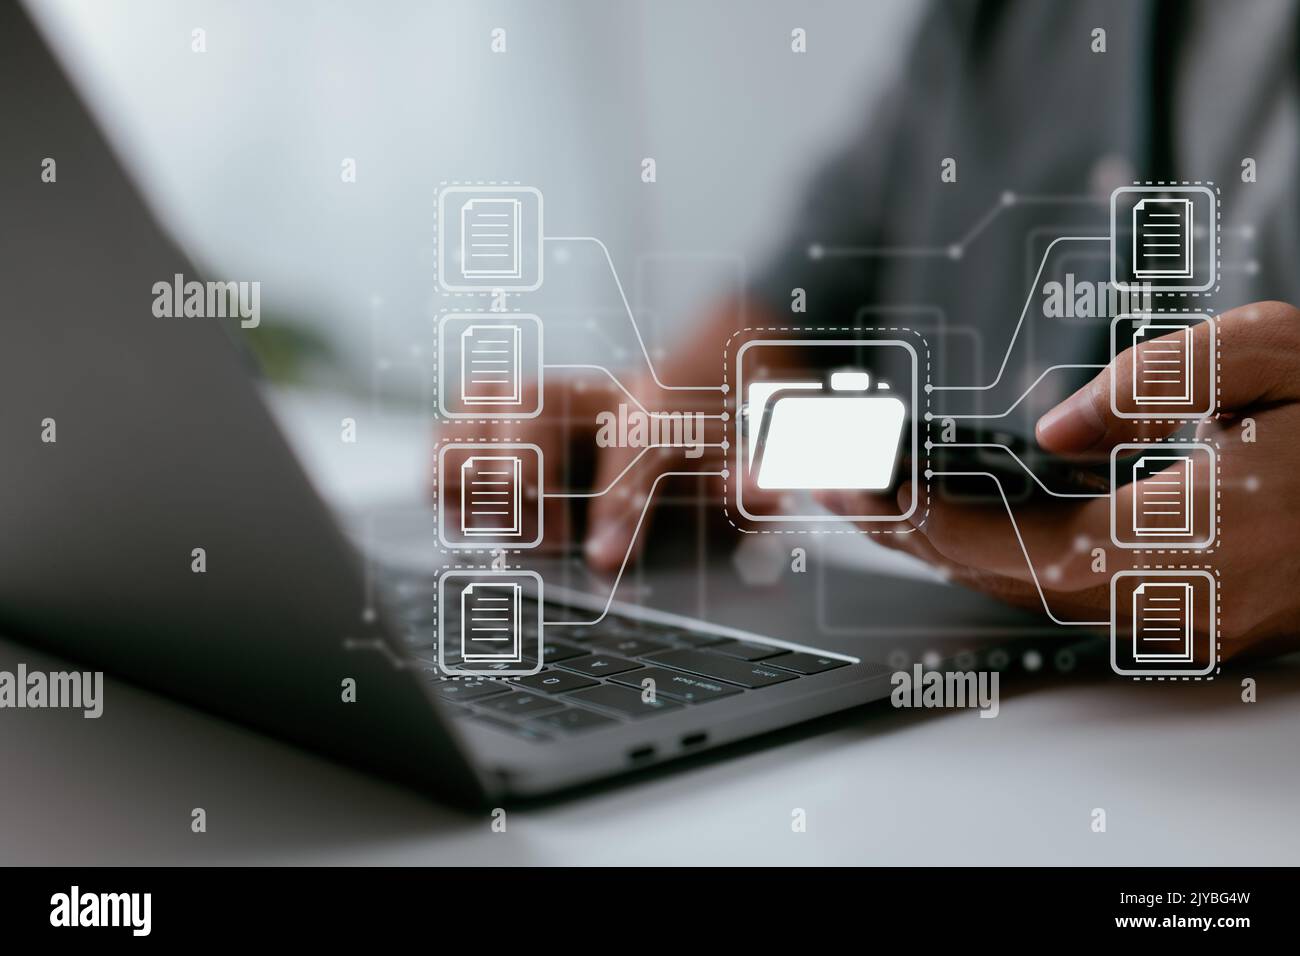 Document Management System (DMS), online documentation database, and process automation to manage files, knowledge, and documents in an ERP environmen Stock Photo